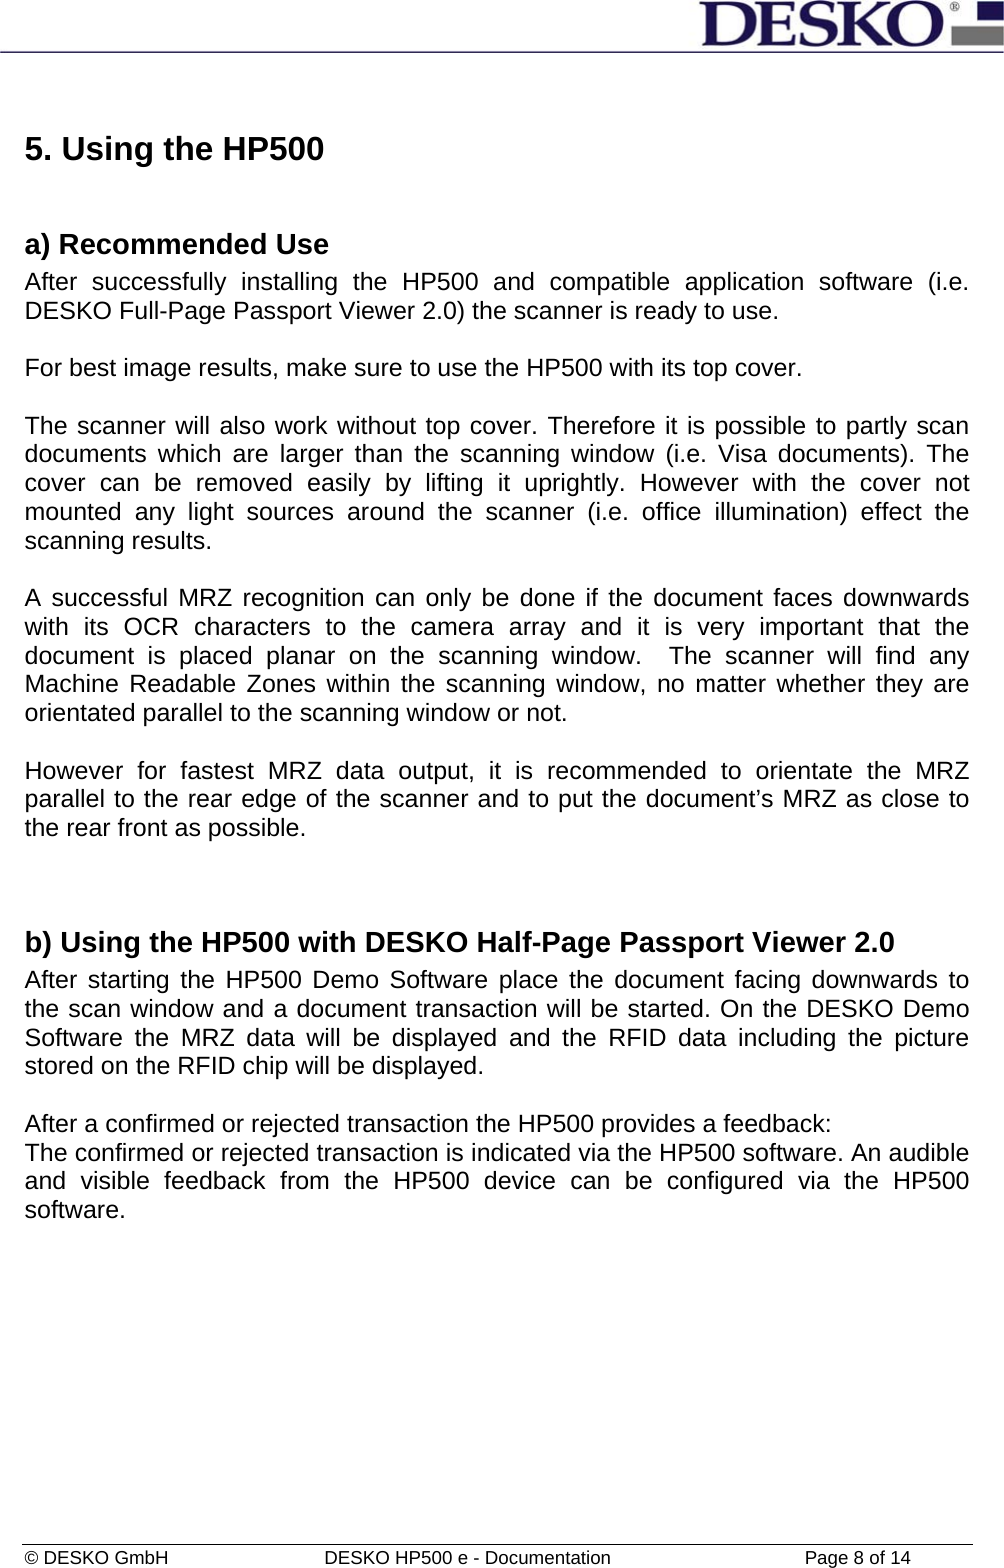  © DESKO GmbH   DESKO HP500 e - Documentation                  Page 8 of 14  5. Using the HP500  a) Recommended Use After successfully installing the HP500 and compatible application software (i.e. DESKO Full-Page Passport Viewer 2.0) the scanner is ready to use.  For best image results, make sure to use the HP500 with its top cover.   The scanner will also work without top cover. Therefore it is possible to partly scan documents which are larger than the scanning window (i.e. Visa documents). The cover can be removed easily by lifting it uprightly. However with the cover not mounted any light sources around the scanner (i.e. office illumination) effect the scanning results.  A successful MRZ recognition can only be done if the document faces downwards with its OCR characters to the camera array and it is very important that the document is placed planar on the scanning window.  The scanner will find any Machine Readable Zones within the scanning window, no matter whether they are orientated parallel to the scanning window or not.   However for fastest MRZ data output, it is recommended to orientate the MRZ parallel to the rear edge of the scanner and to put the document’s MRZ as close to the rear front as possible.  b) Using the HP500 with DESKO Half-Page Passport Viewer 2.0 After starting the HP500 Demo Software place the document facing downwards to the scan window and a document transaction will be started. On the DESKO Demo Software the MRZ data will be displayed and the RFID data including the picture stored on the RFID chip will be displayed.  After a confirmed or rejected transaction the HP500 provides a feedback: The confirmed or rejected transaction is indicated via the HP500 software. An audible and visible feedback from the HP500 device can be configured via the HP500 software.  